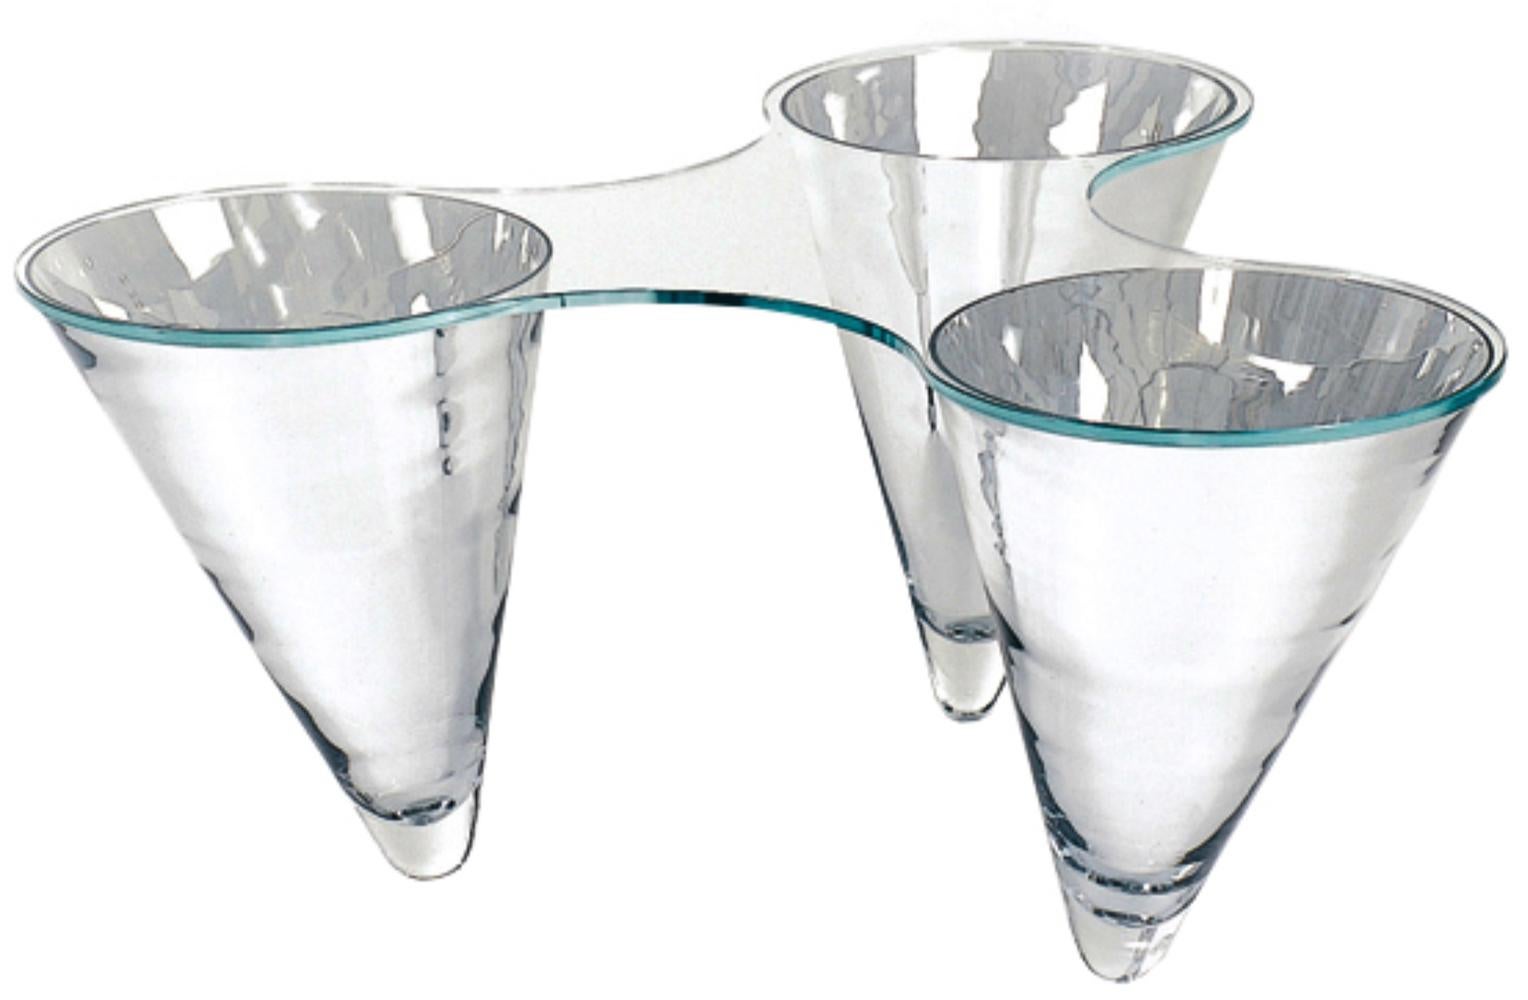 An all glass coffee table with a base made of 3 mouth-blown cones. 3 versions are available. This coffee or lounge table is excellently suitable for grouping arrangements because of its adaptable shape. The unexpected twist becomes clear in the